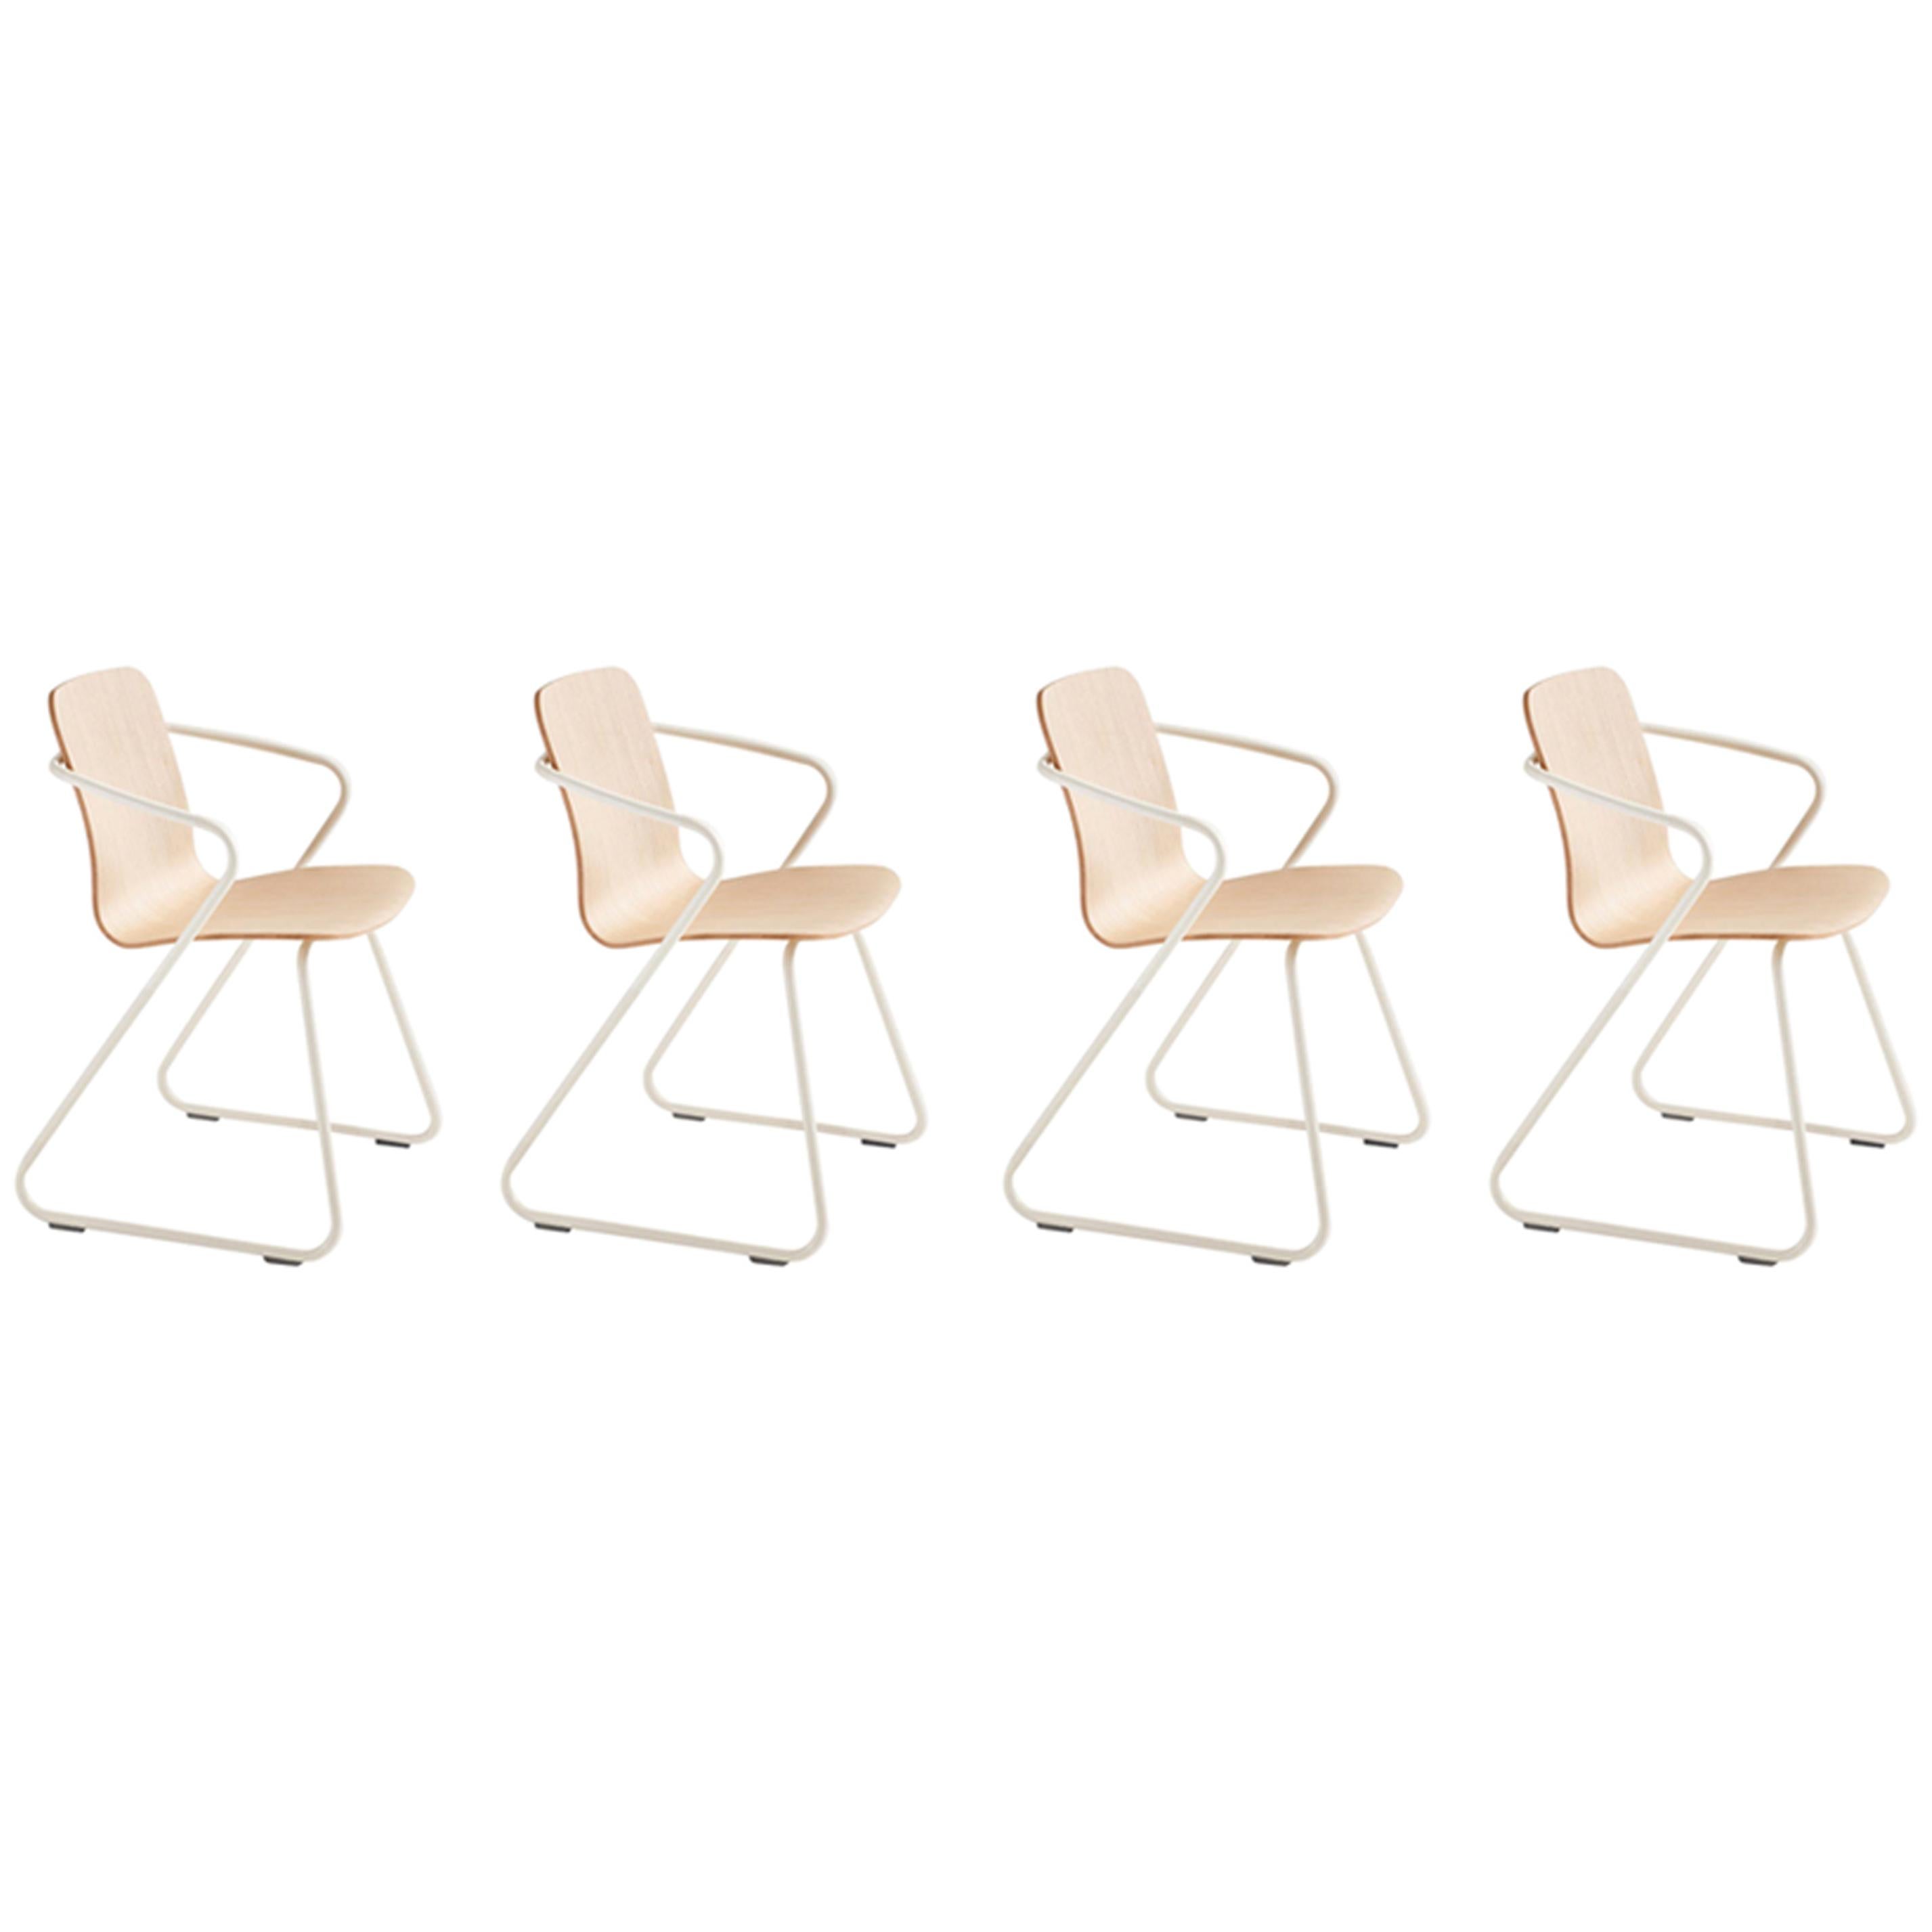 Adolfo Abejon Set of 4 Contemporary 'Cobra' Wood and Metal Sculptural Chair